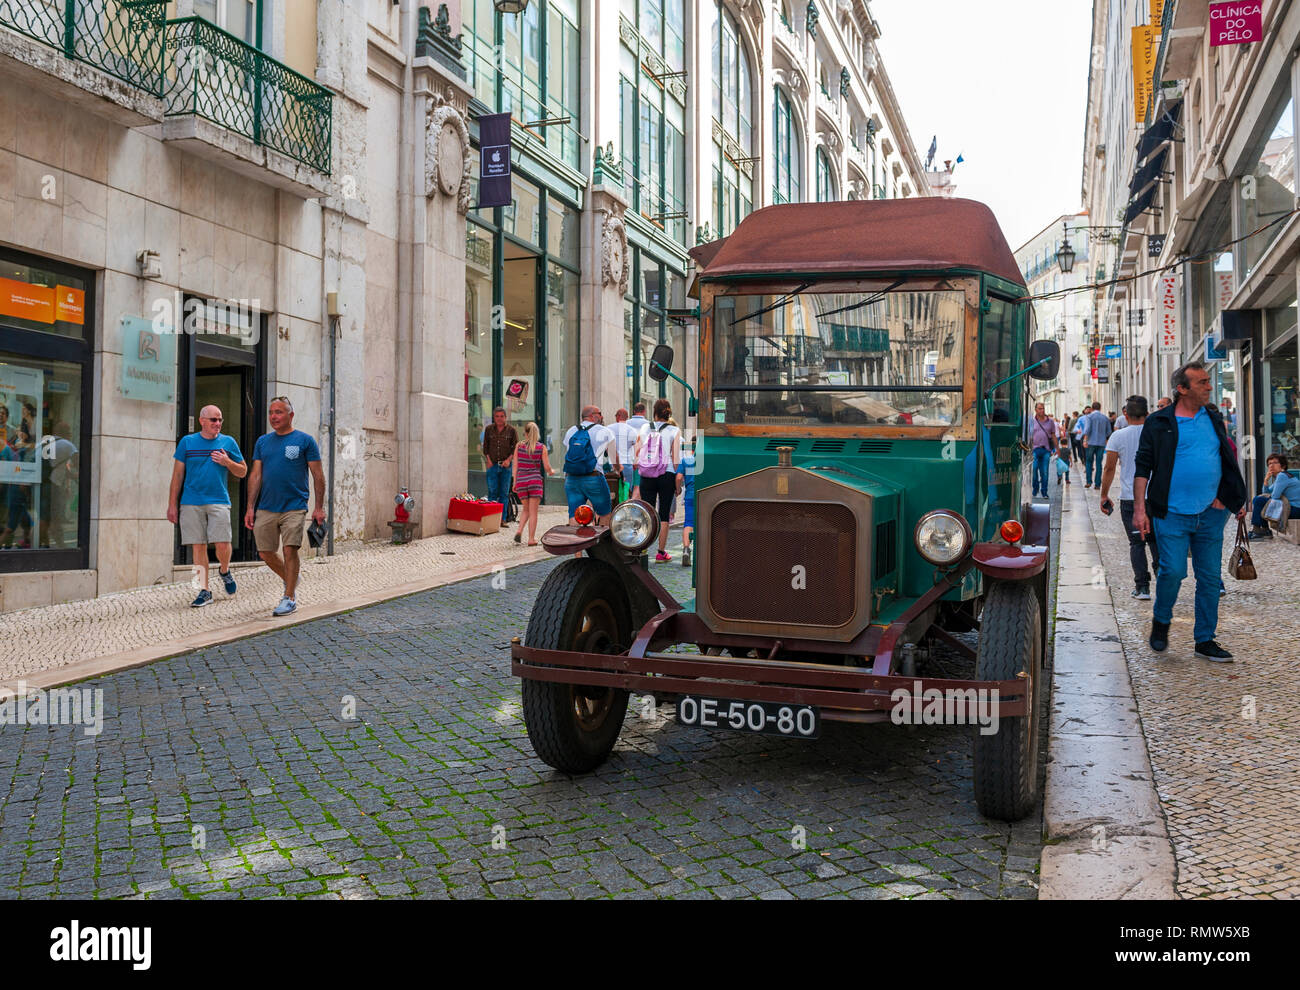 A vintage car in the streets of Lisbon, Portugal. Stock Photo